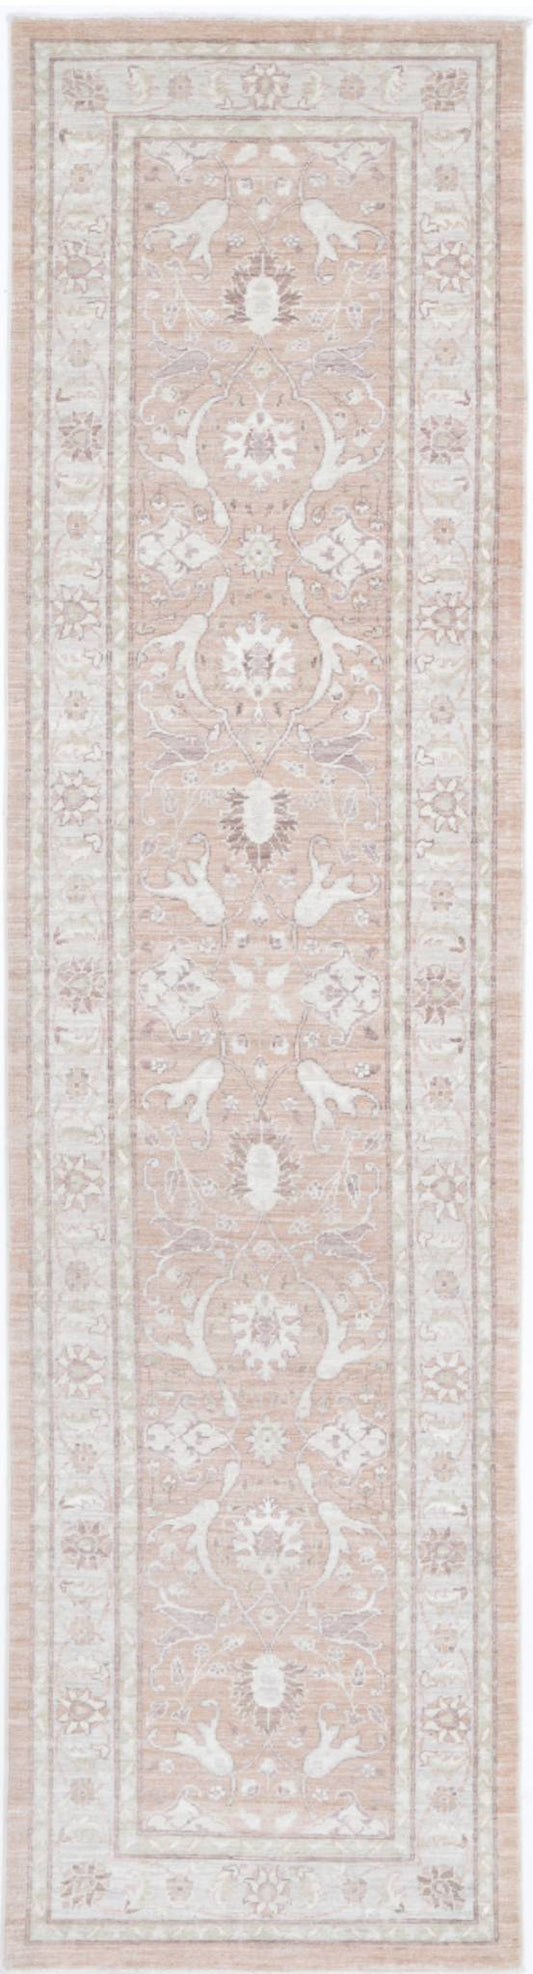 Traditional Hand Knotted Serenity Tabriz Wool Rug of Size 2'4'' X 9'8'' in Peach and Grey Colors - Made in Afghanistan